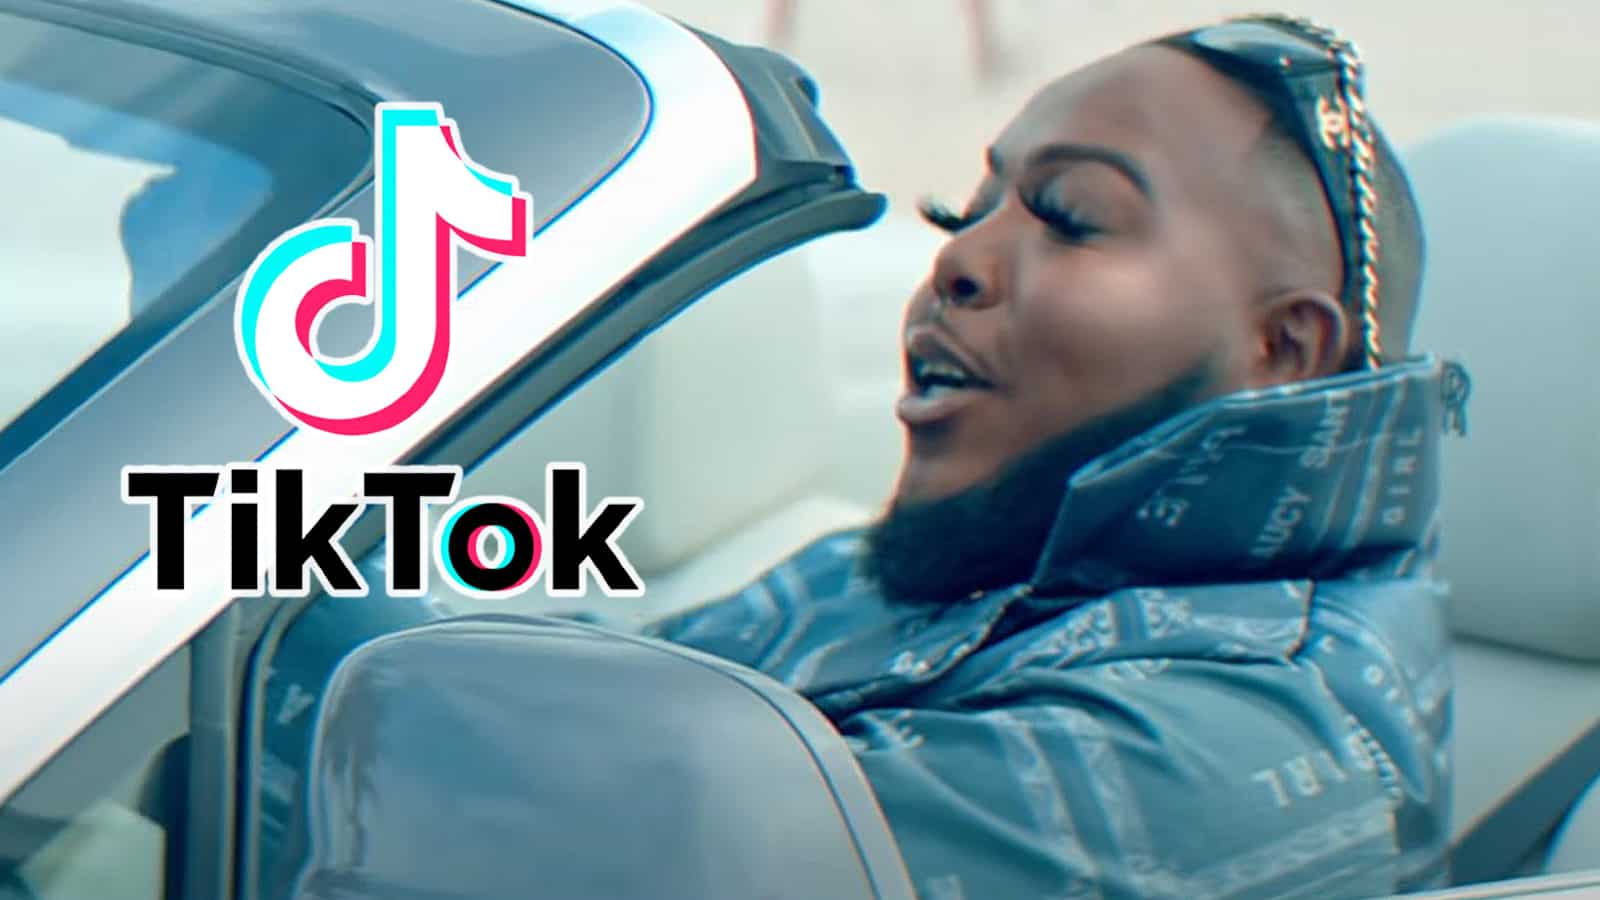 What is the viral material girl tiktok trend